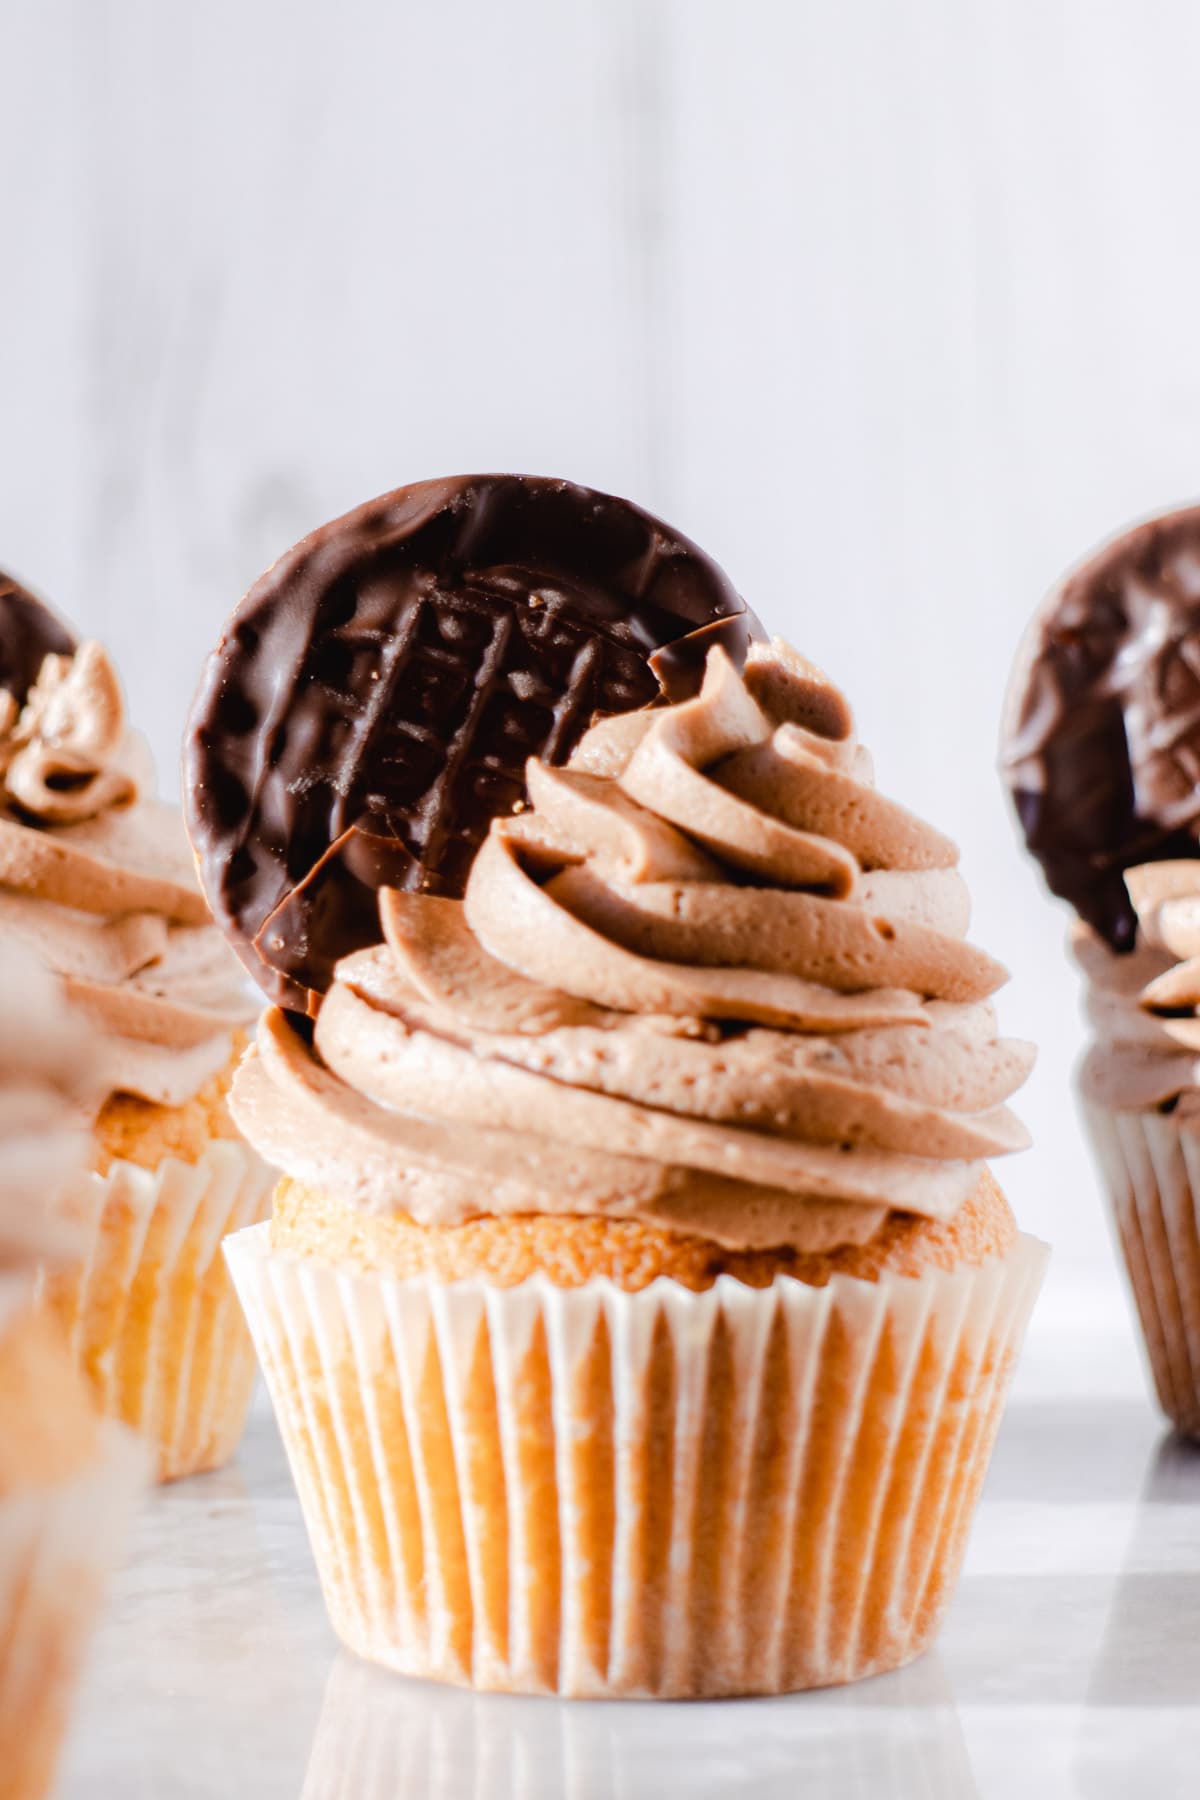 Cupcake topped with chocolate orange buttercream frosting